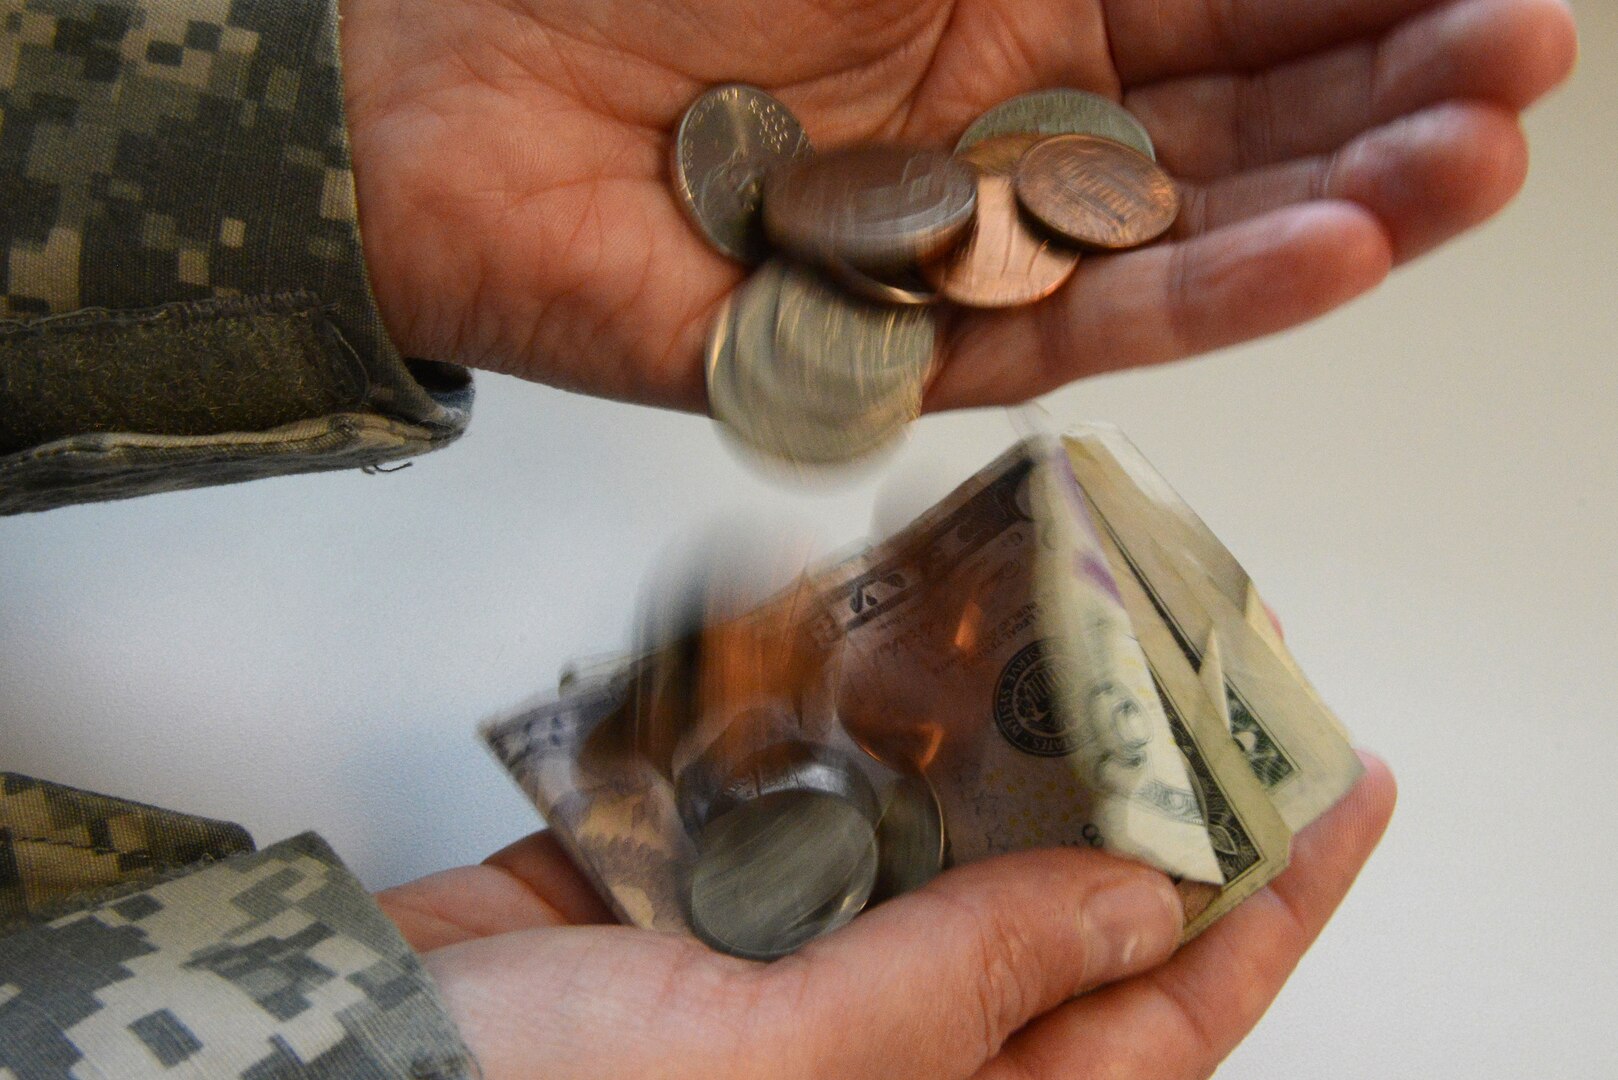 Soldiers are urged to take advantage of free financial counseling available at all installations, to help avoid the pitfalls that could put them under a mountain of debt.